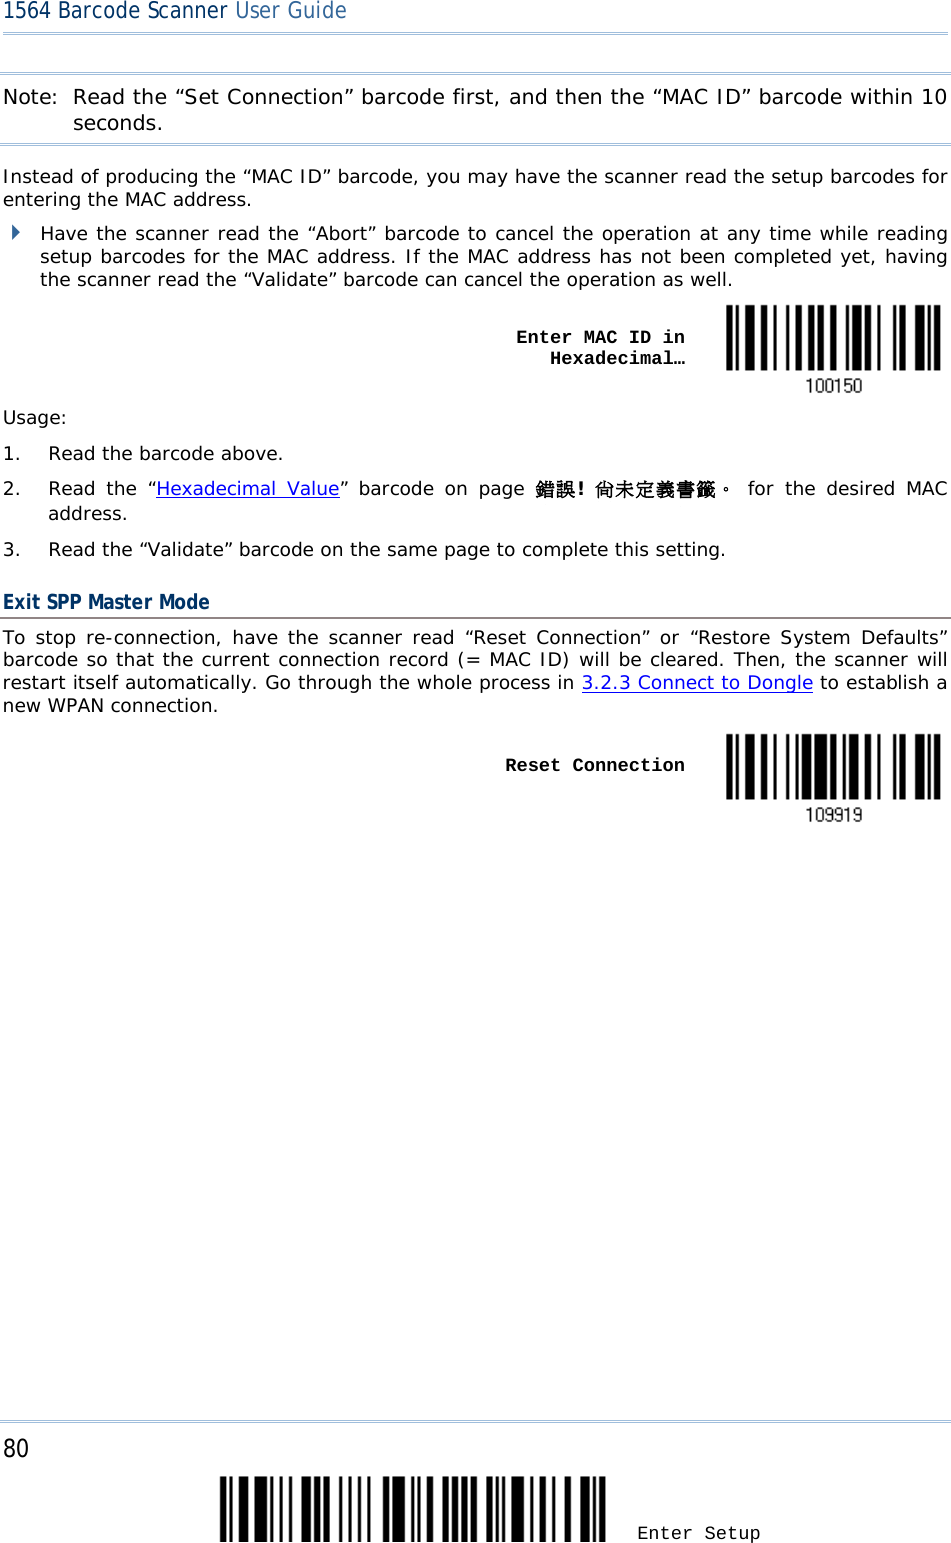 80 Enter Setup 1564 Barcode Scanner User Guide  Note: Read the “Set Connection” barcode first, and then the “MAC ID” barcode within 10 seconds. Instead of producing the “MAC ID” barcode, you may have the scanner read the setup barcodes for entering the MAC address.  Have the scanner read the “Abort” barcode to cancel the operation at any time while reading setup barcodes for the MAC address. If the MAC address has not been completed yet, having the scanner read the “Validate” barcode can cancel the operation as well.      Enter MAC ID in Hexadecimal…  Usage:  1. Read the barcode above. 2. Read the “Hexadecimal Value” barcode on page 錯誤! 尚未定義書籤。 for the desired MAC address. 3. Read the “Validate” barcode on the same page to complete this setting. Exit SPP Master Mode To stop re-connection, have the scanner read “Reset Connection” or “Restore System Defaults” barcode so that the current connection record (= MAC ID) will be cleared. Then, the scanner will restart itself automatically. Go through the whole process in 3.2.3 Connect to Dongle to establish a new WPAN connection.    Reset Connection                            